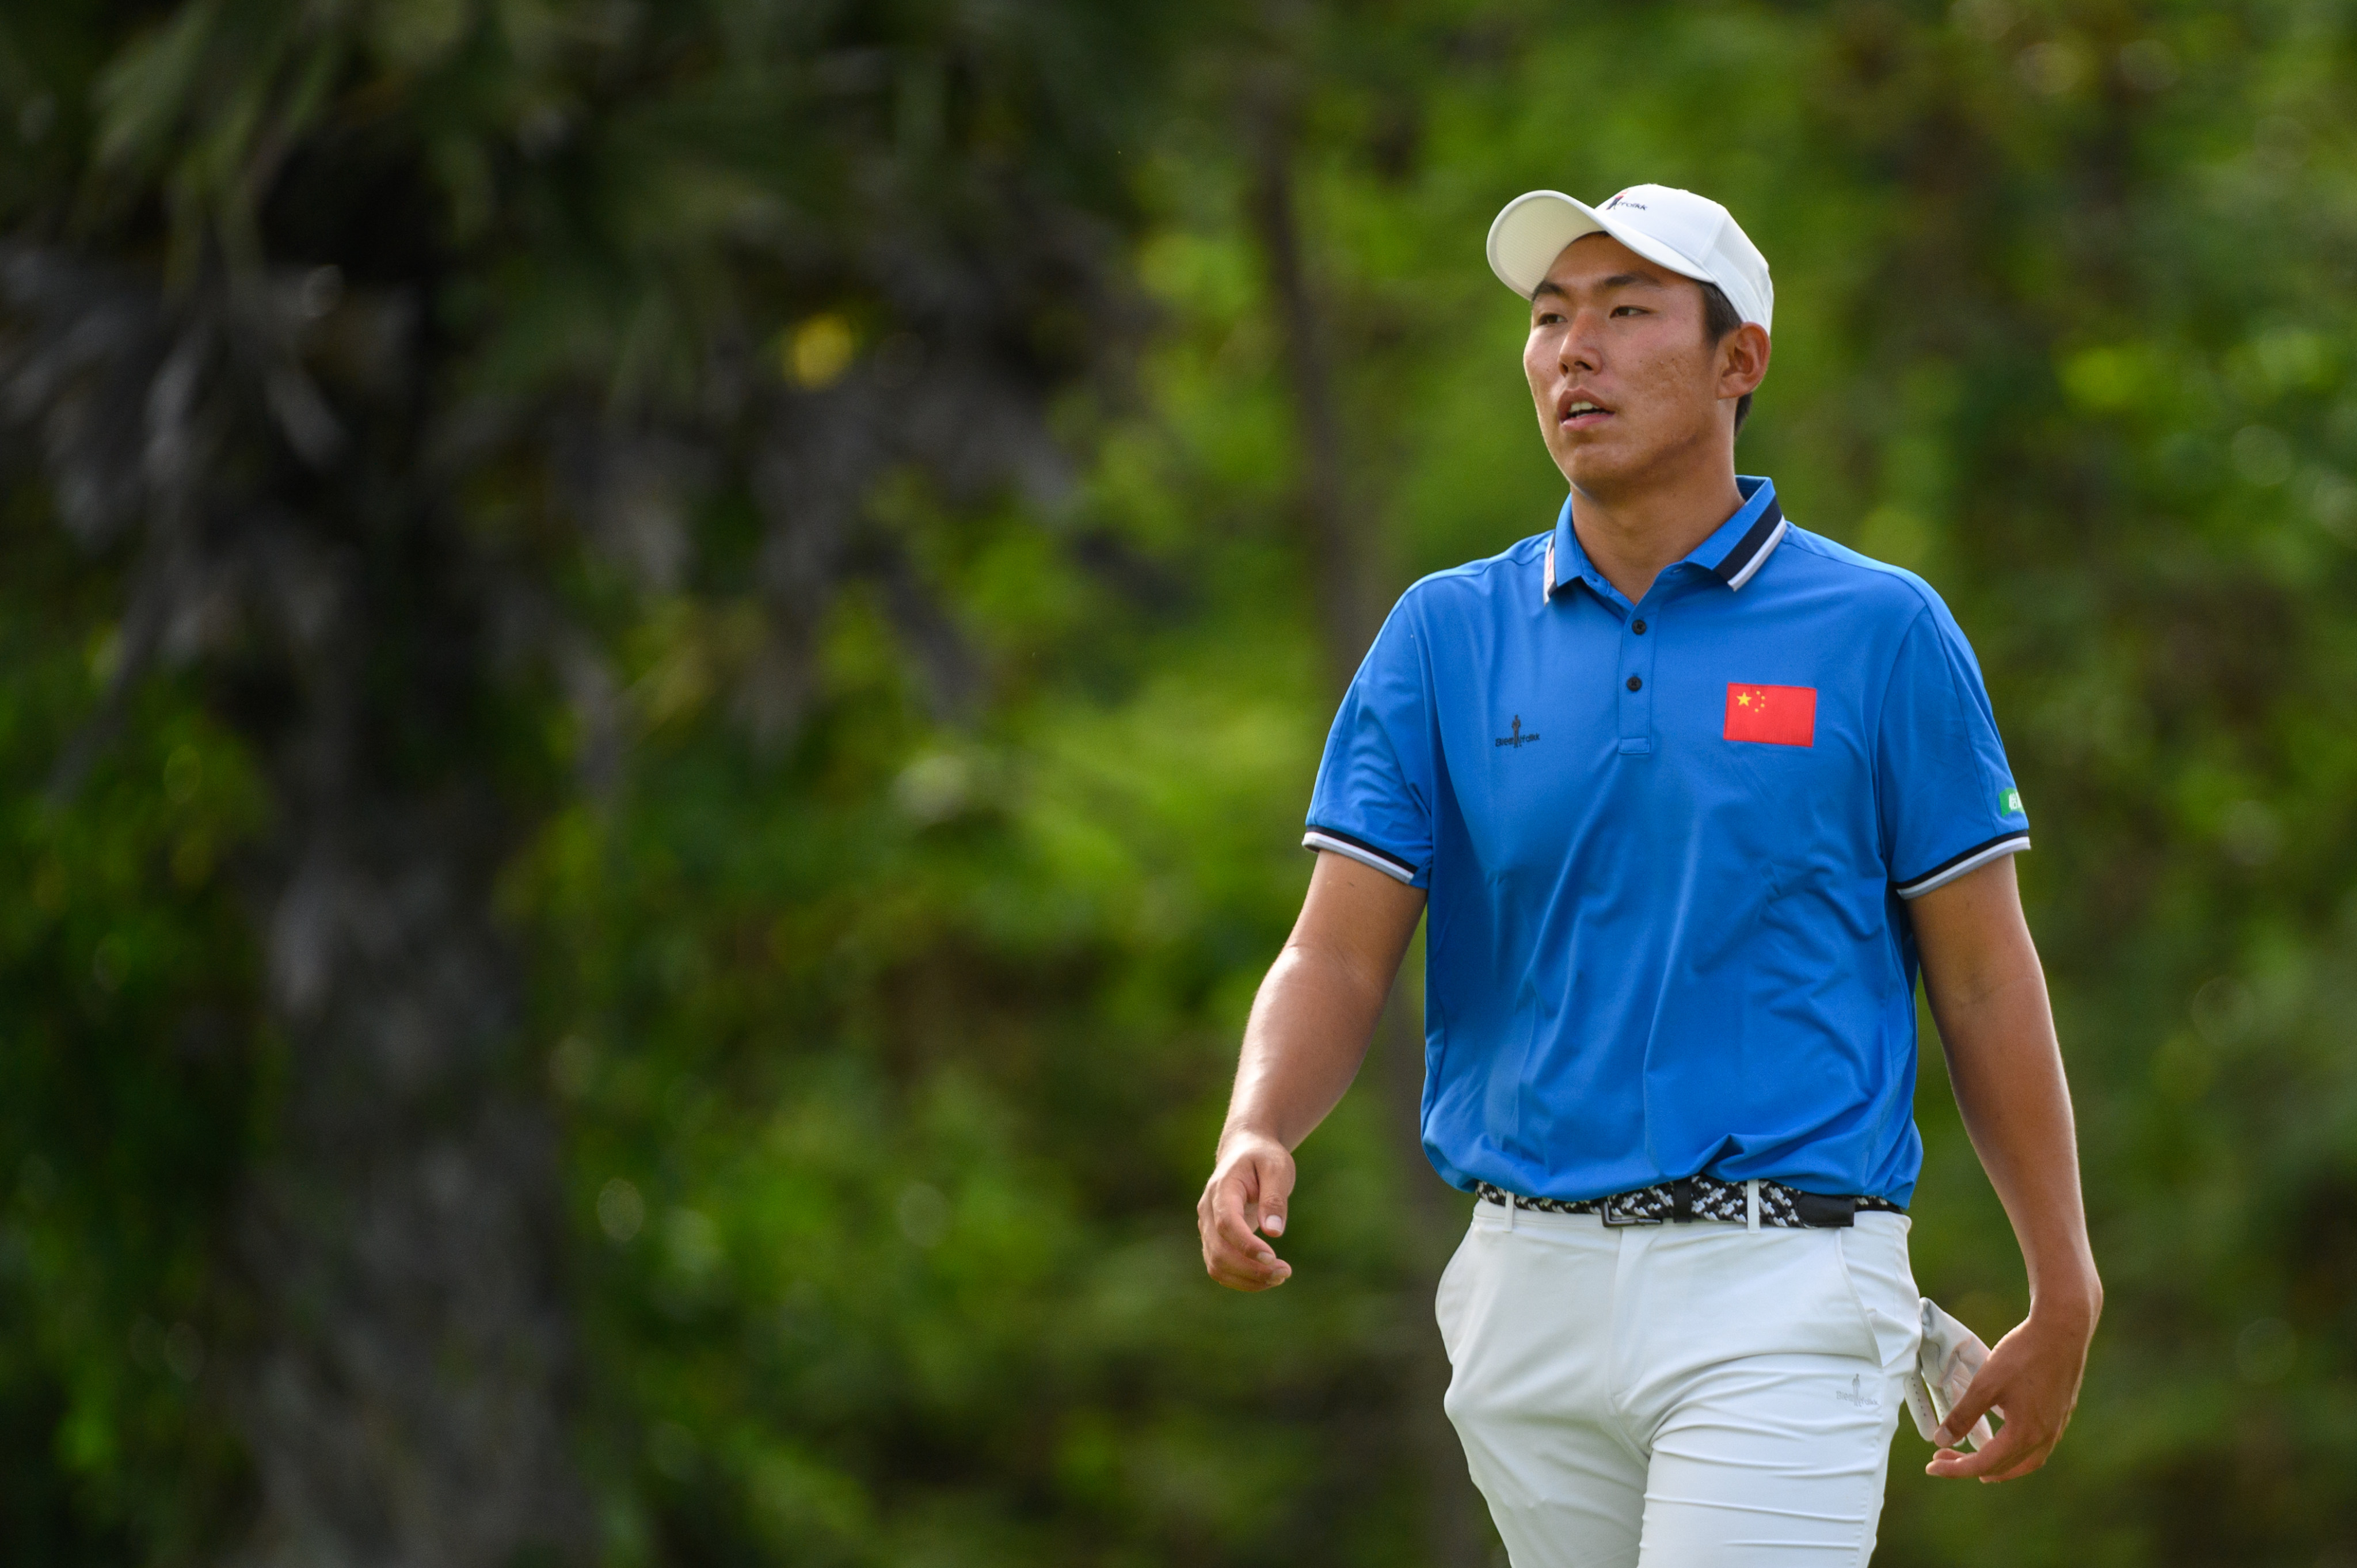 Bo Jin of China walks down the fairway in Round 1 of the 2022 Asia-Pacific Amateur Championship at the Amata Spring Country Club in Thailand. Photos: AAC